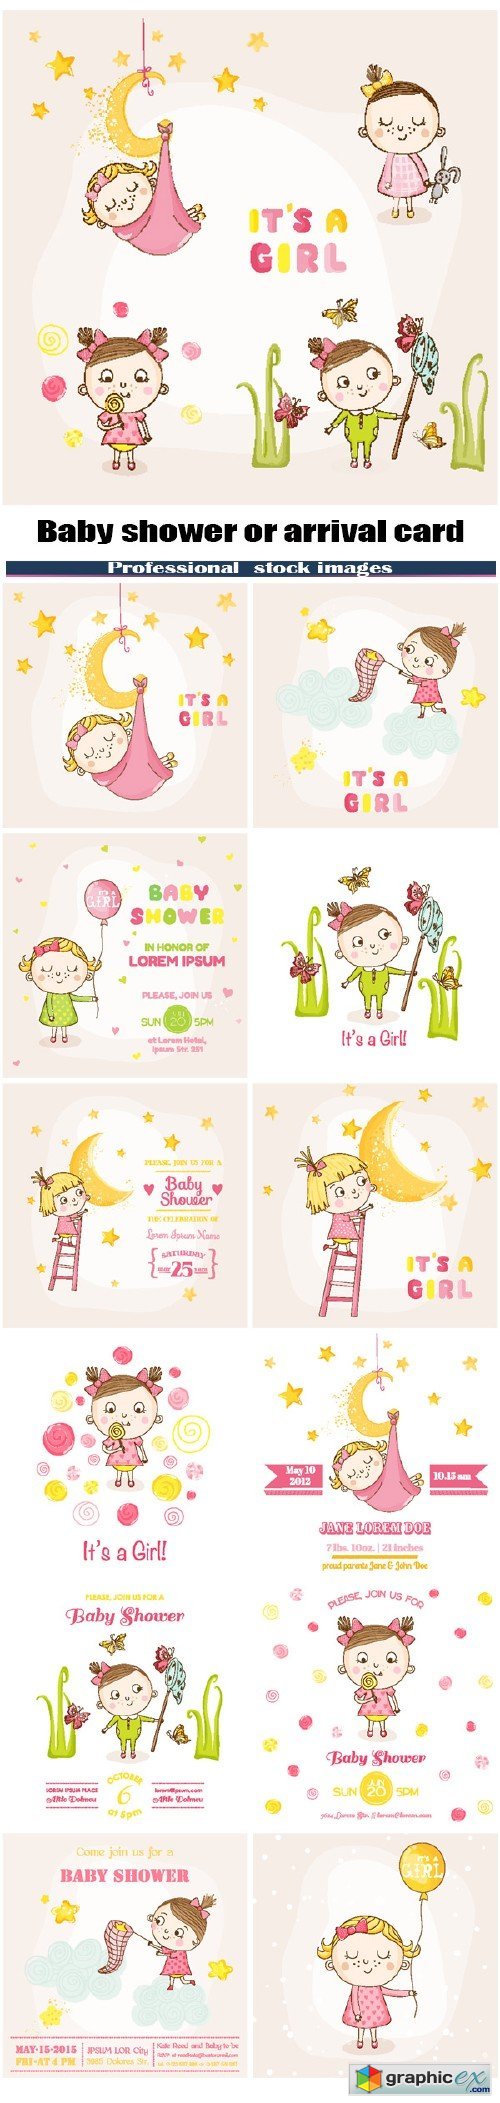 Baby shower or arrival card - Baby girl